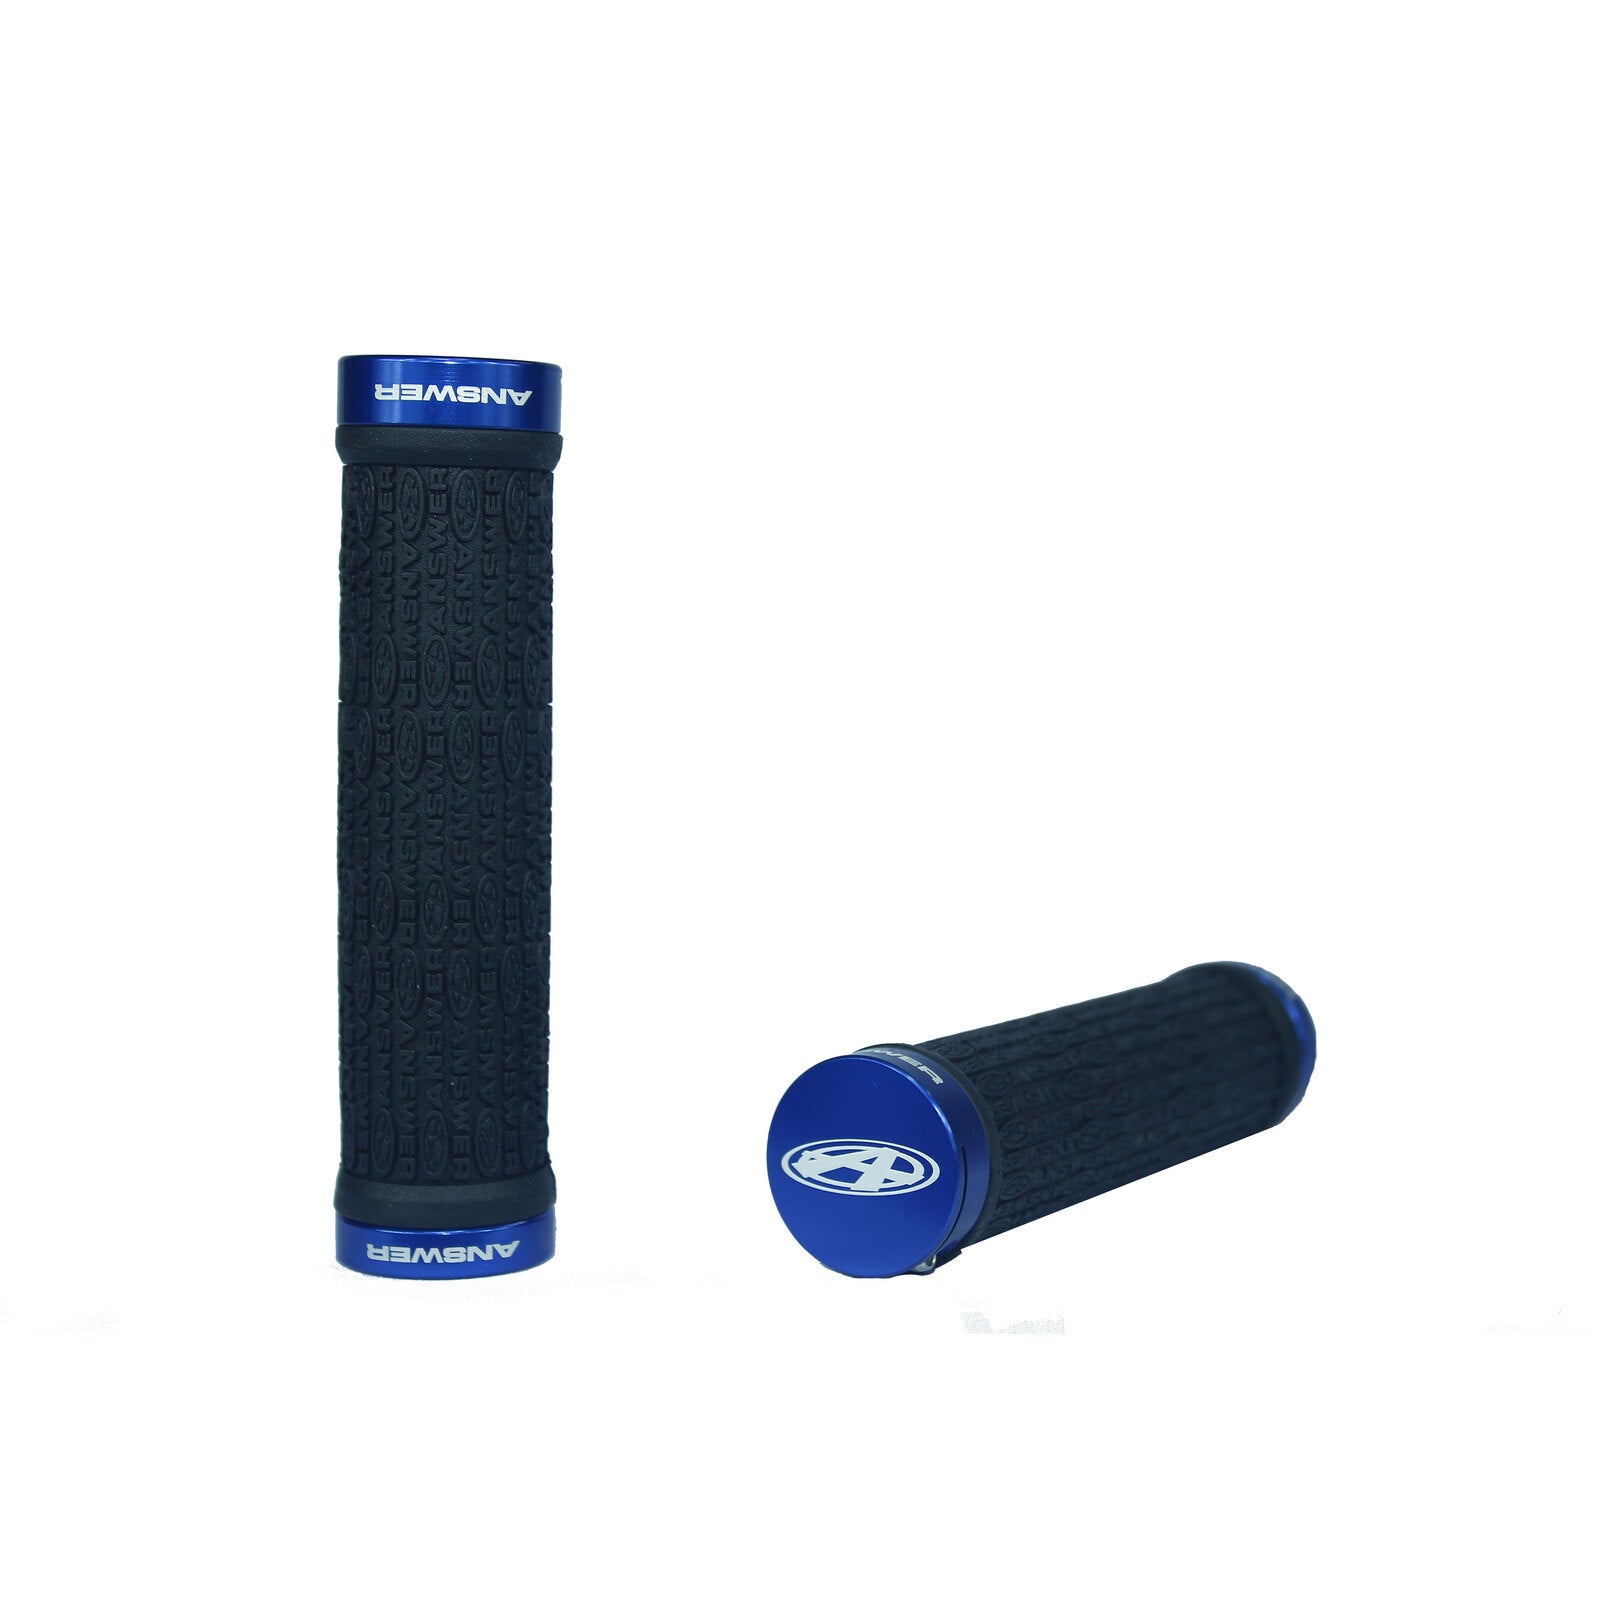 A pair of Answer Pro Lock-On Flangless Grips, with a black and blue color scheme, on a white background.